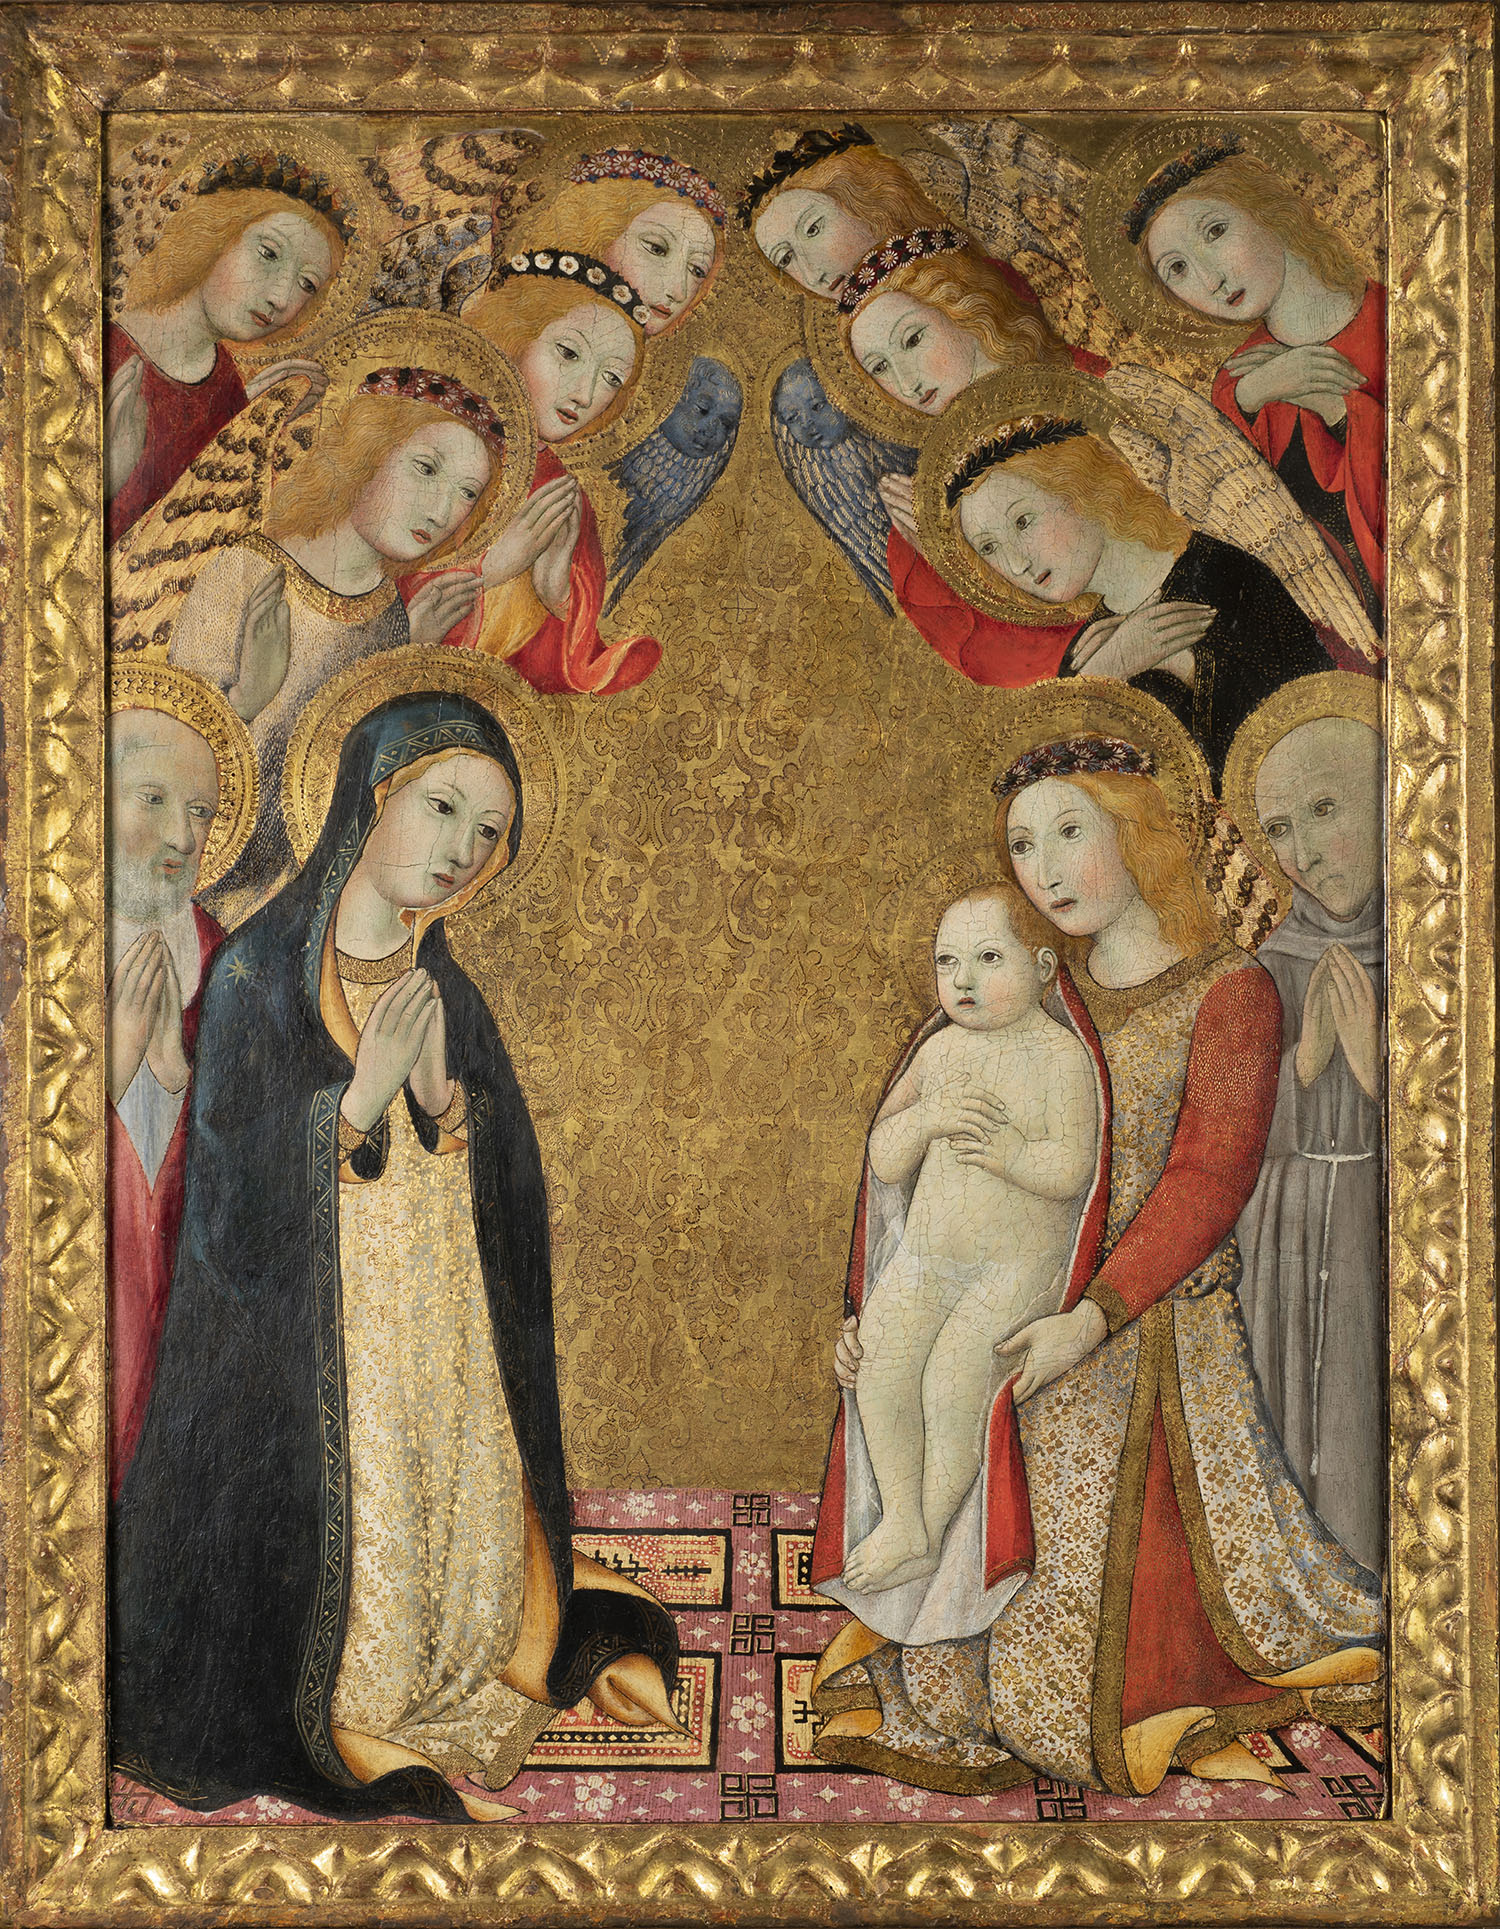 Figure 1: Sano di Pietro, Adoration of the Child. 1473. Egg tempera on panel with gilding. 20.5 x 15 inches (64.5 x 85.5 cm) Gift of the Samuel H. Kress Collection, Mead Art Museum, Amherst, MA.